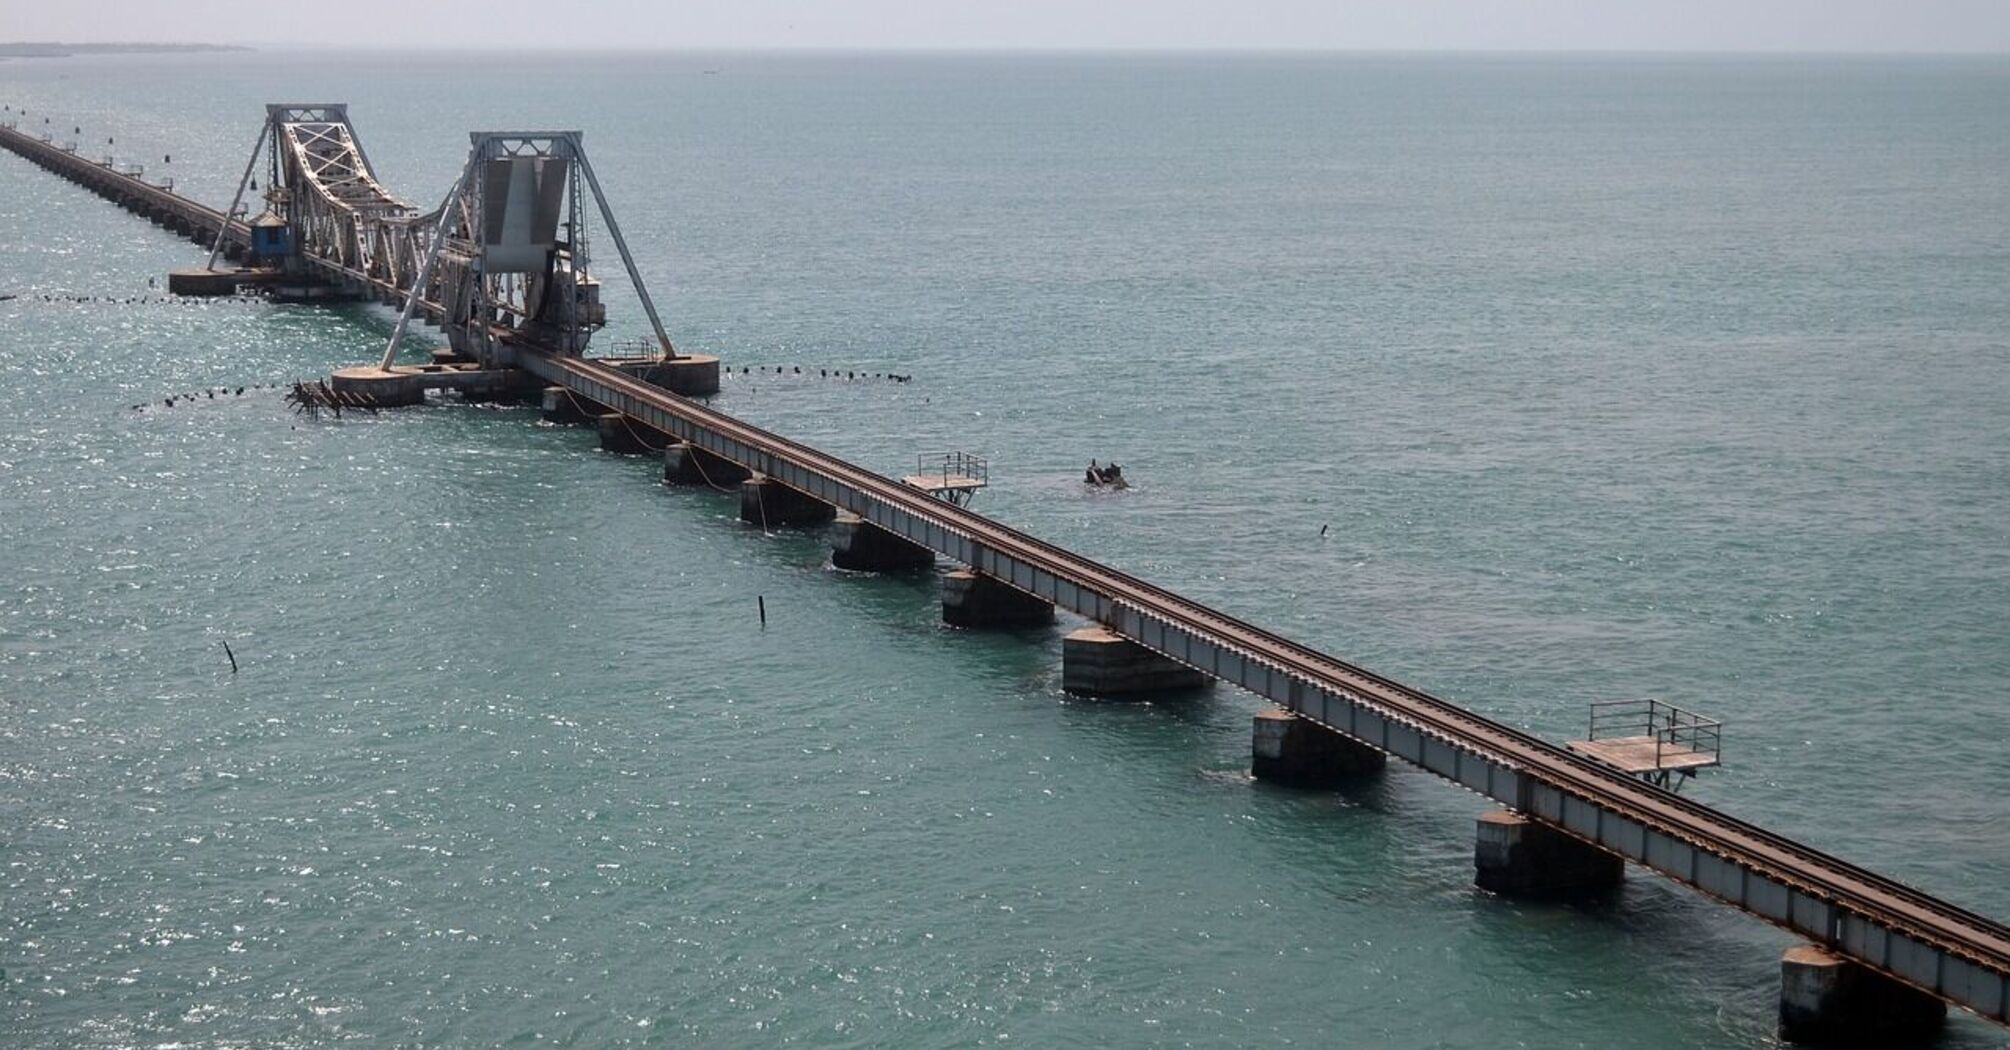 The first sea bridge in India with vertical lift, Pamban Bridge, will soon be ready